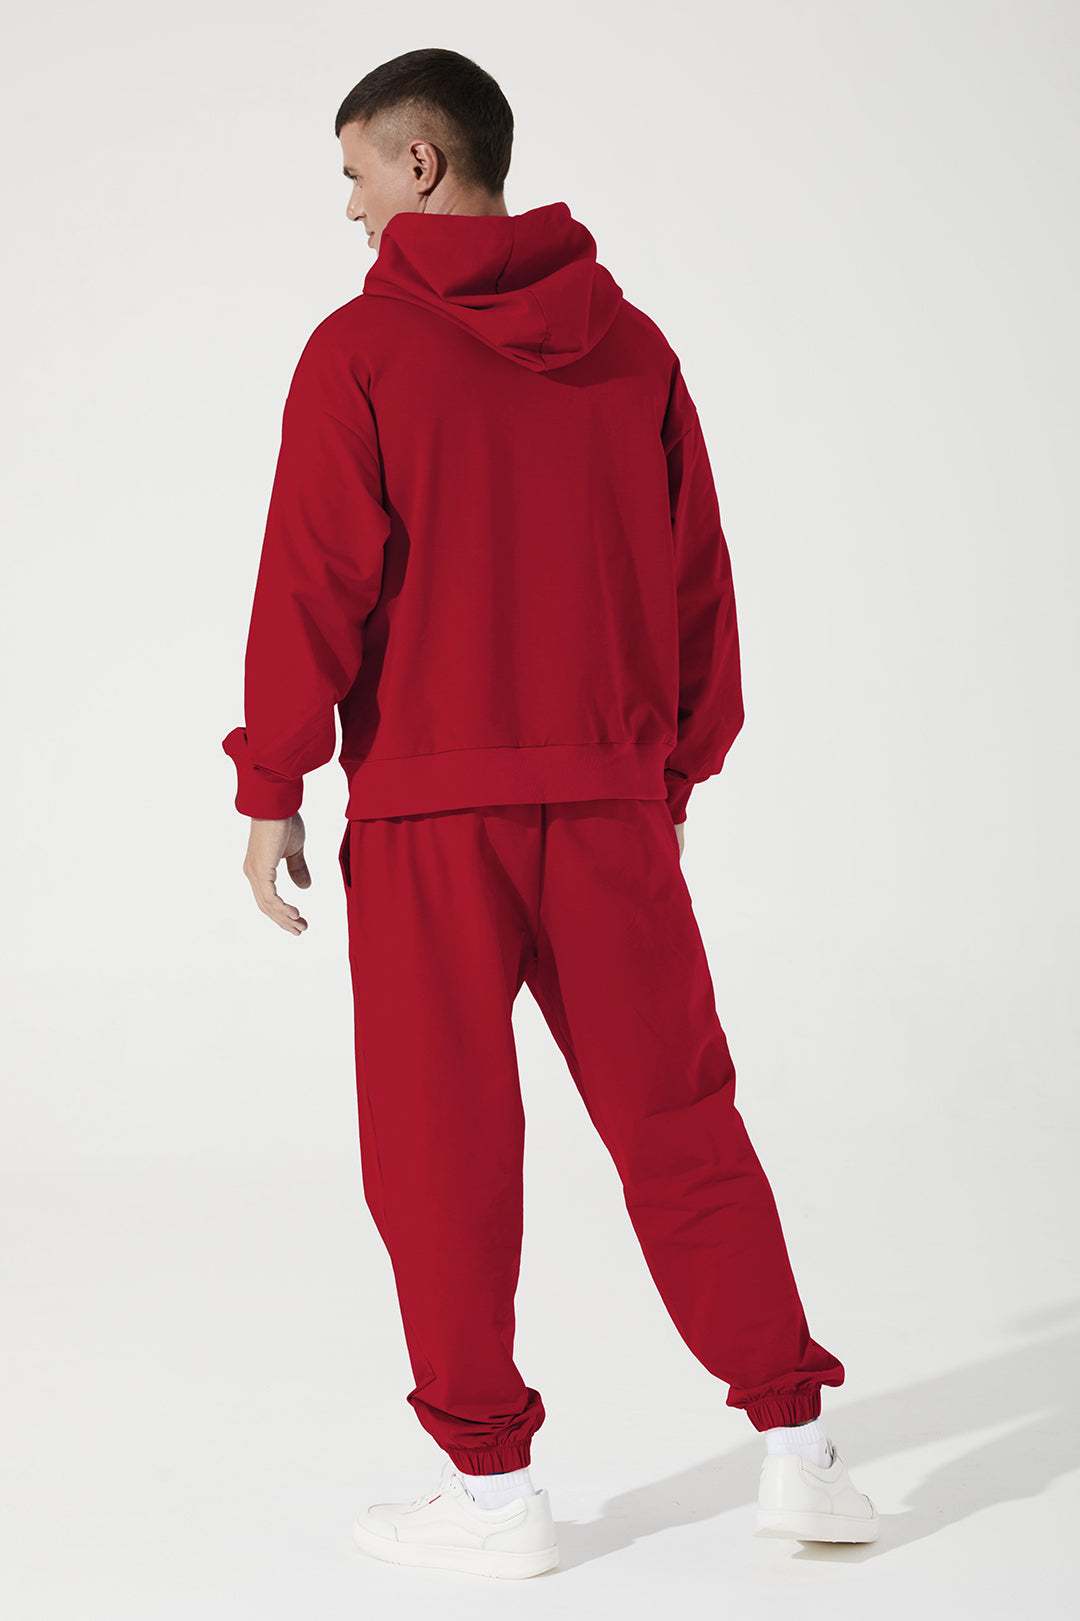 Vibrant magenta red men's hoodie with a cropped style, perfect for a trendy look.